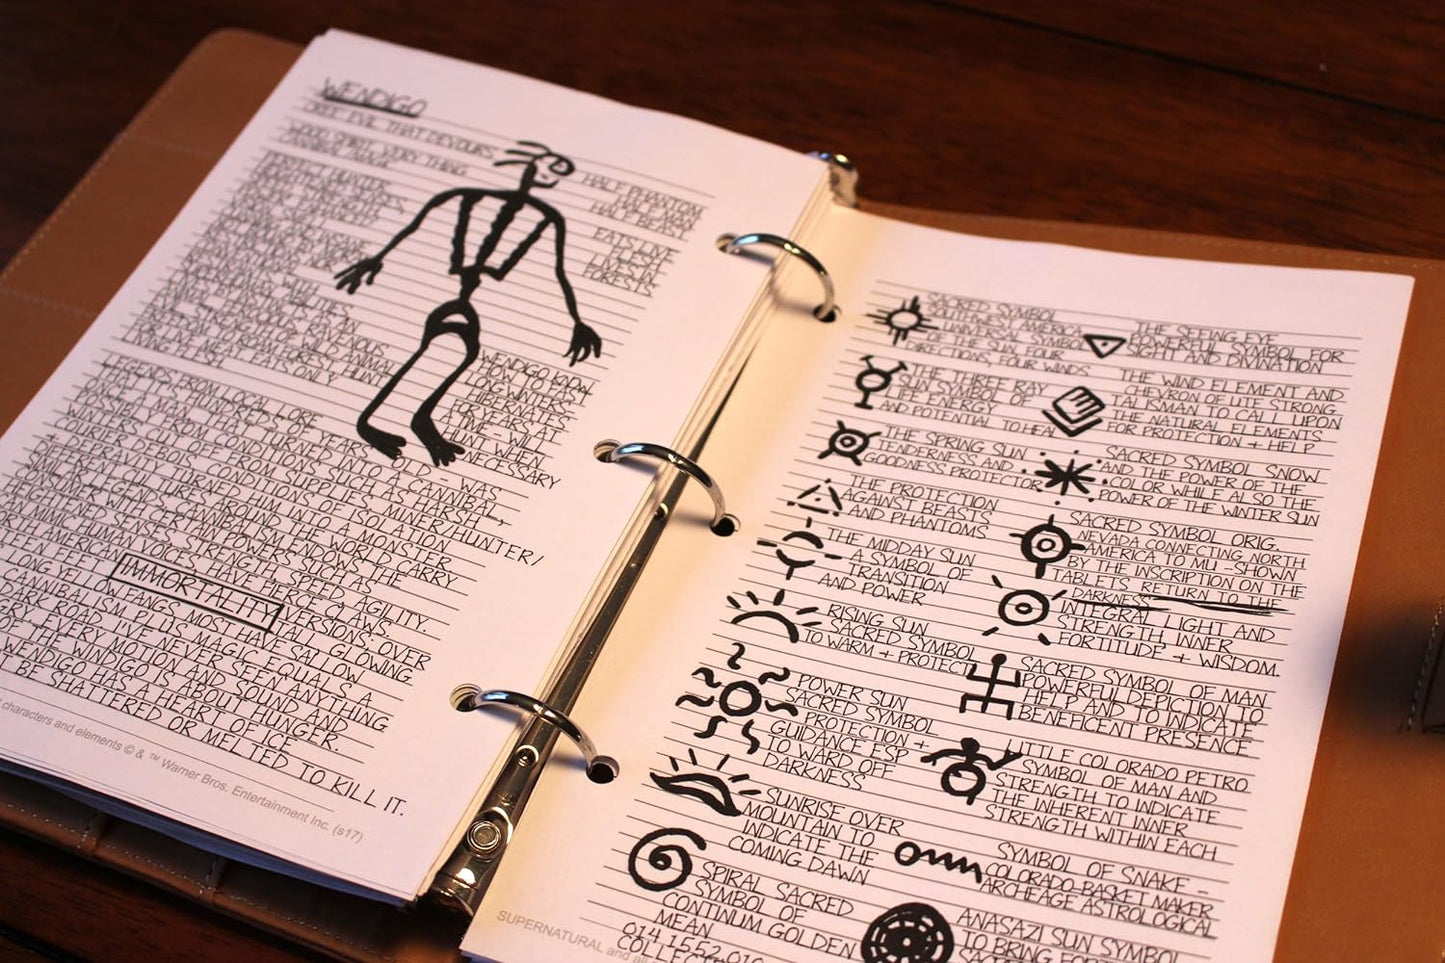 Close up view of lined paper in a brown leather journal. Across the pages are various symbols and their meanings. On the left side is a drawing of a Windigo with a description of the monster underneath.